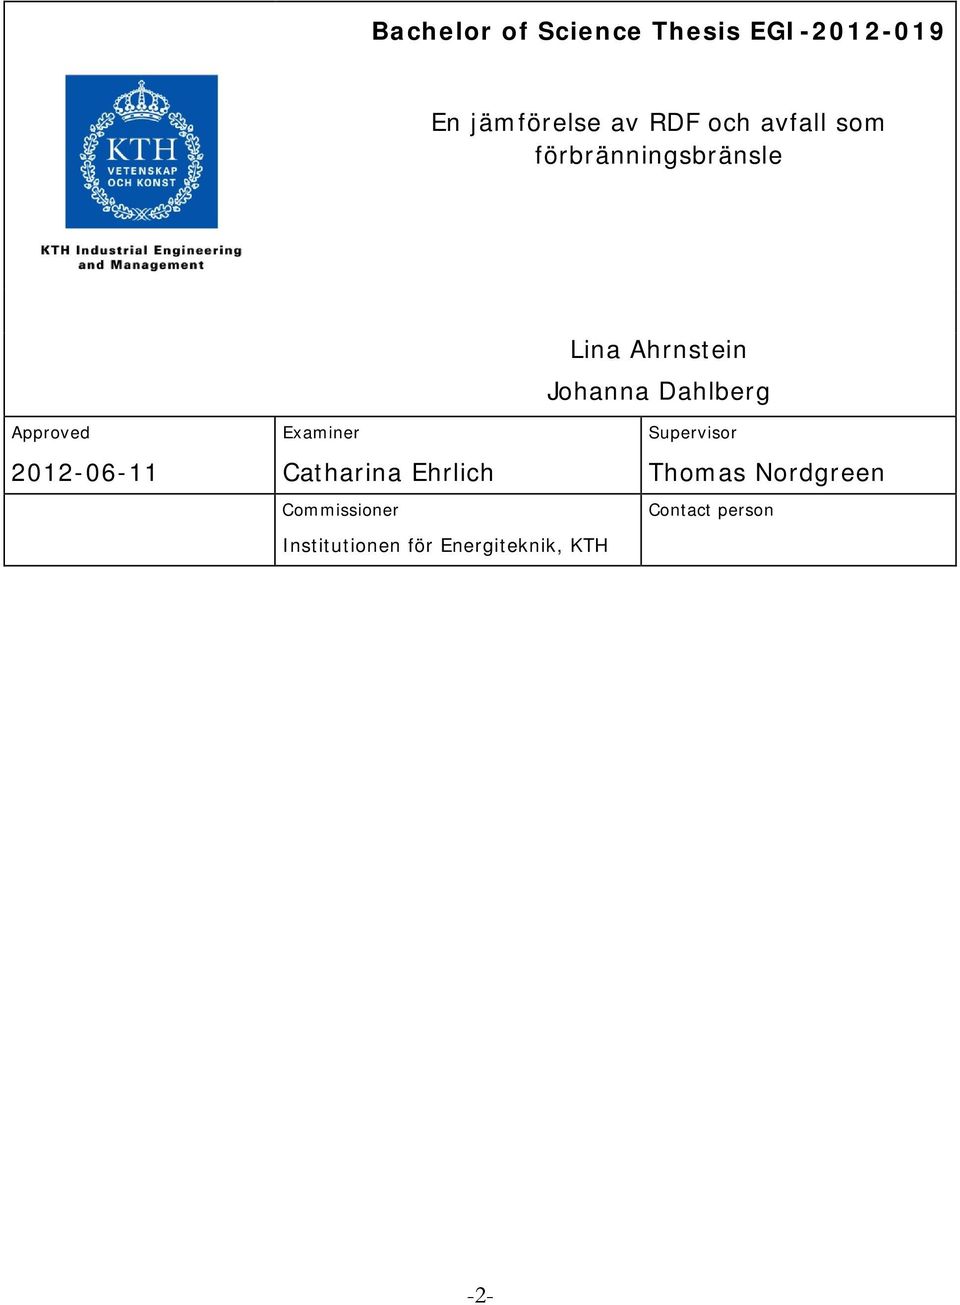 Approved 2012-06-11 Examiner Catharina Ehrlich Commissioner